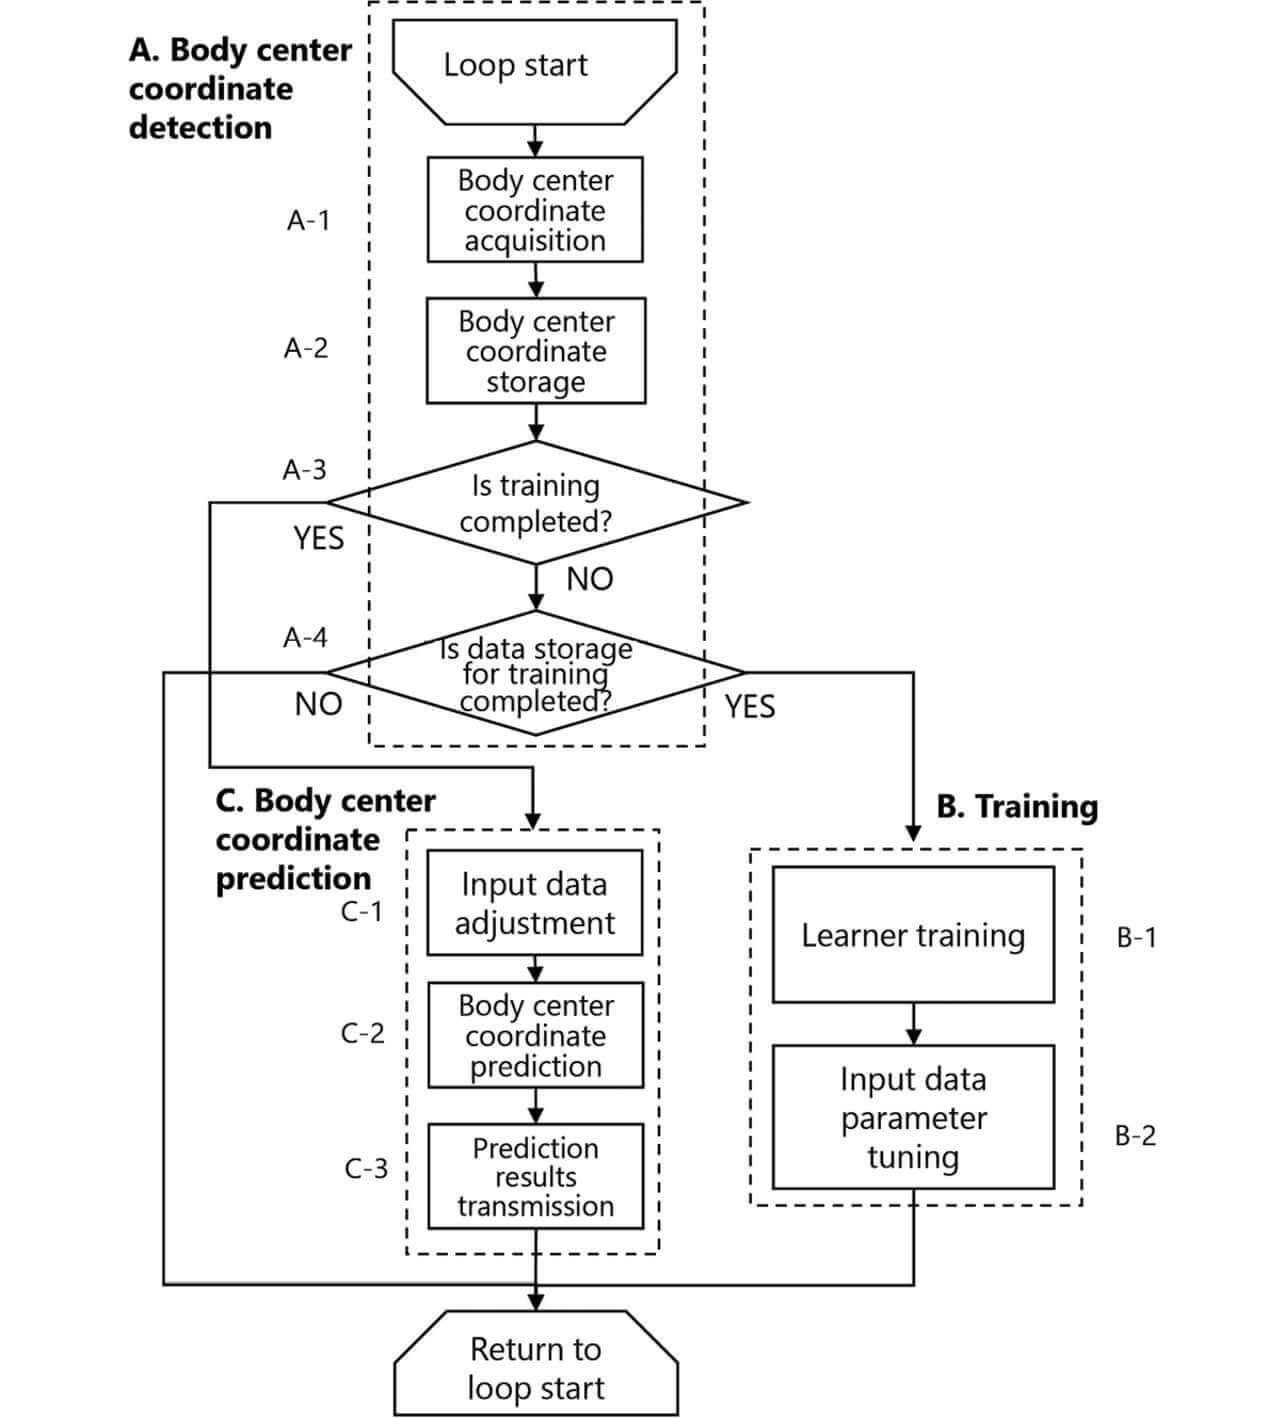 Fig. 5 Prediction Technology Application Method Processing Flow